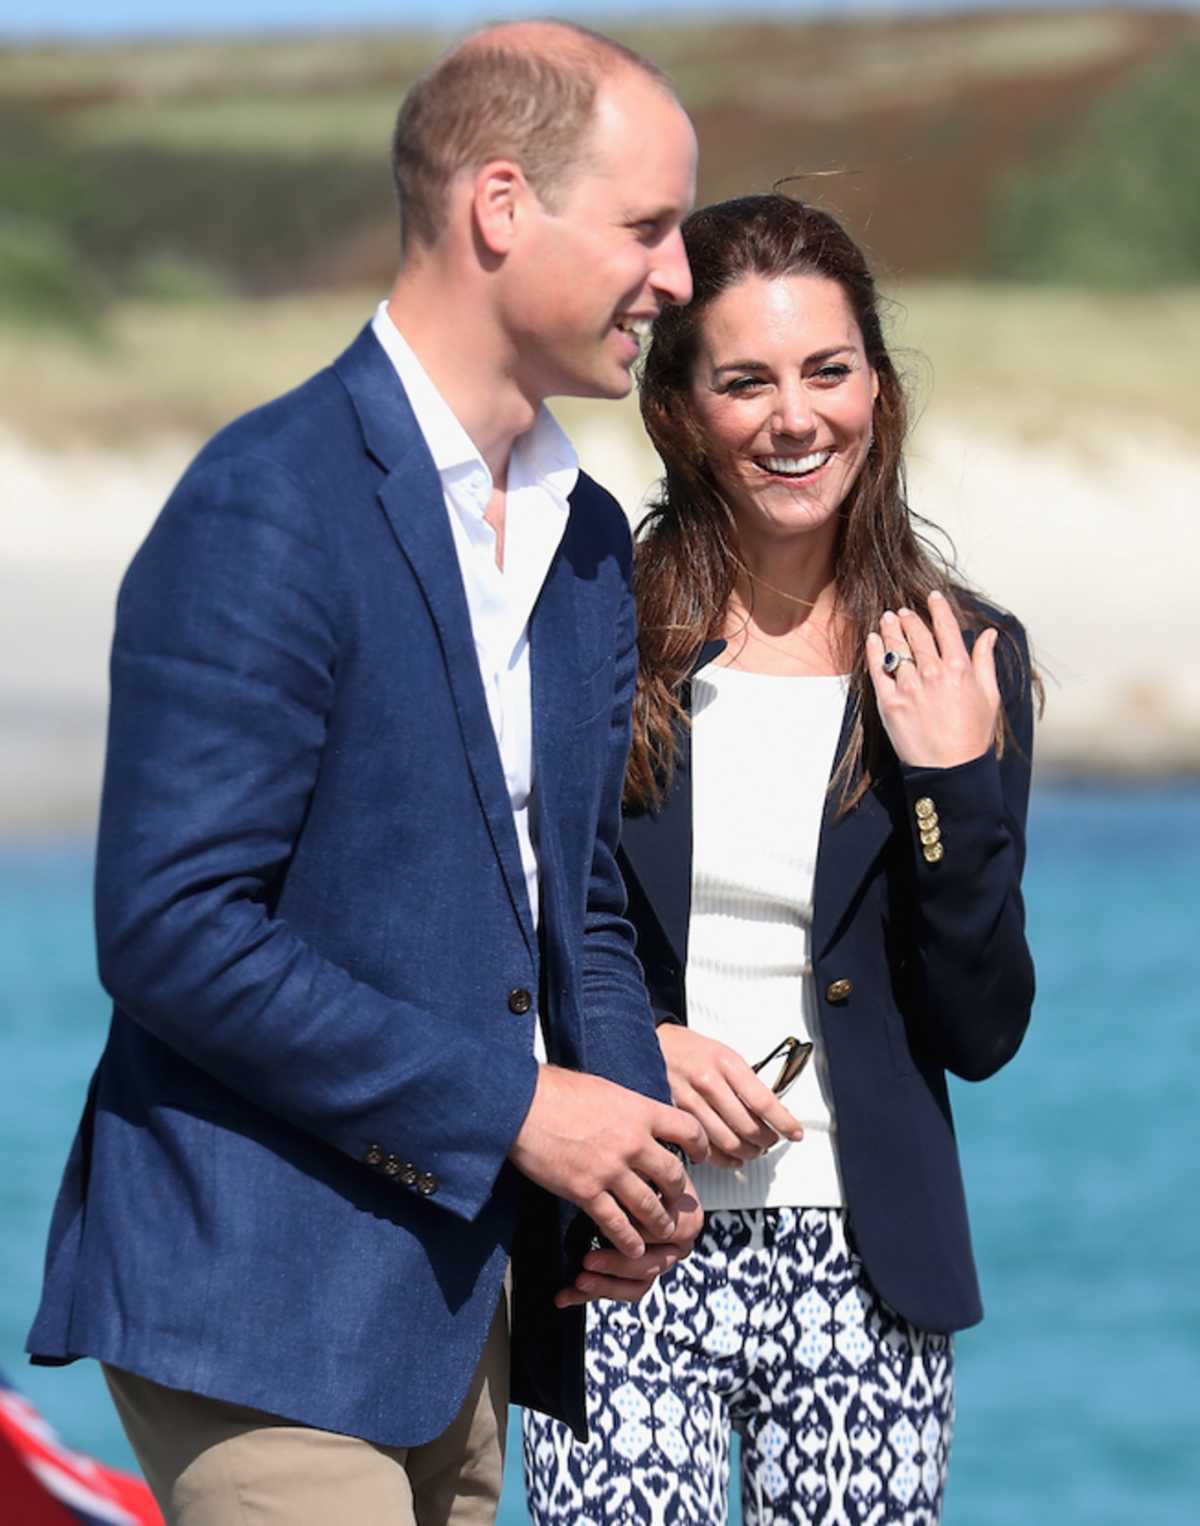 Some Breathtaking Photos of Royals at the Beach